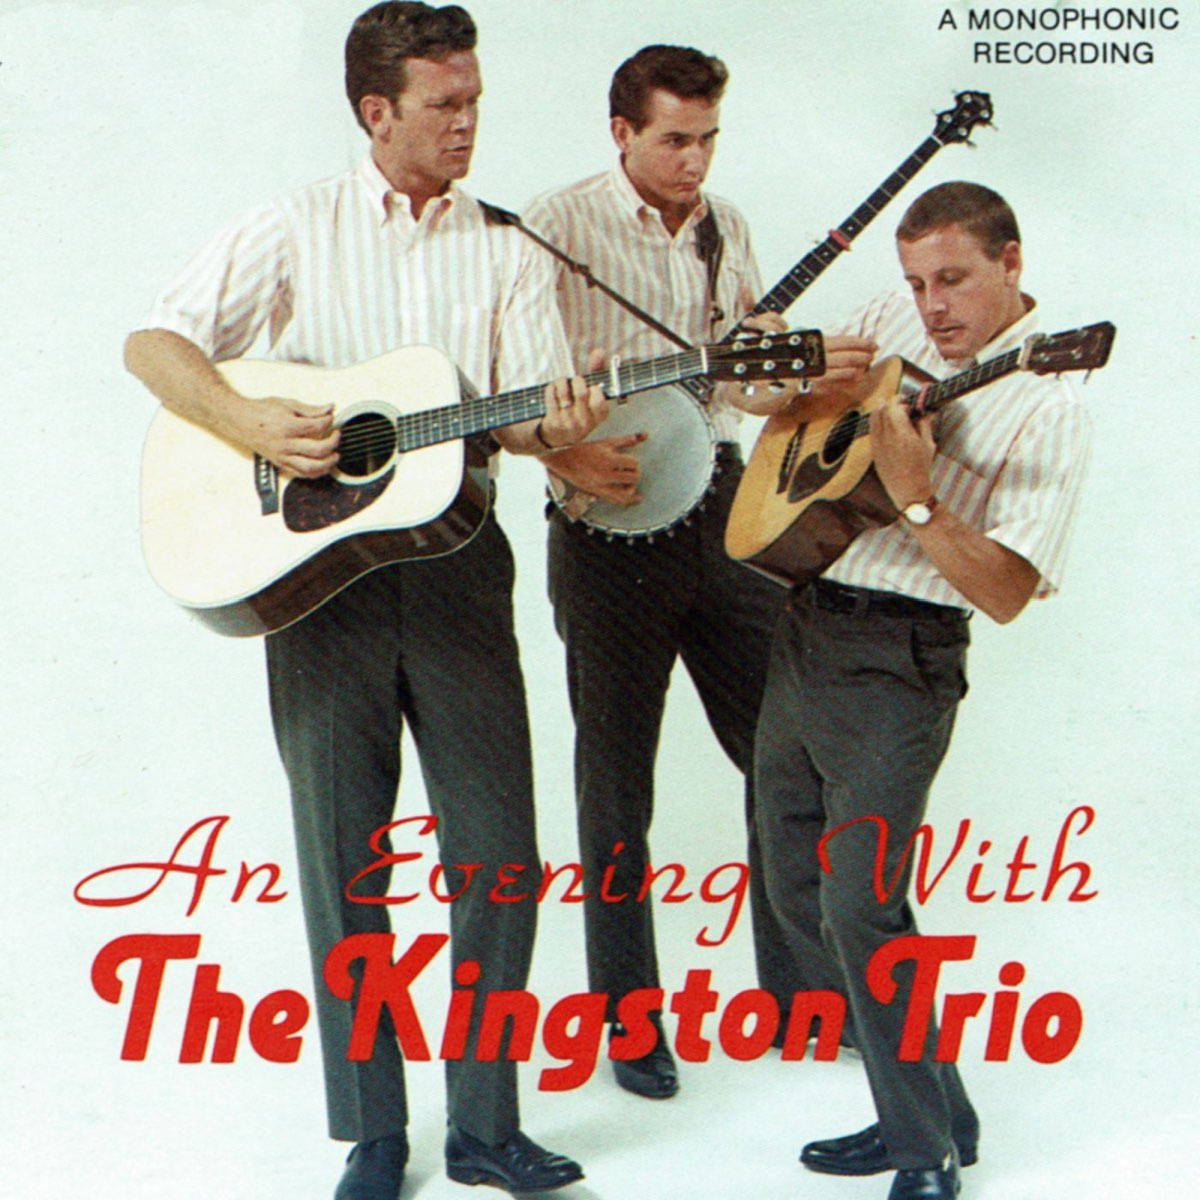 An Evening With The Kingston Trio Album Wallpaper